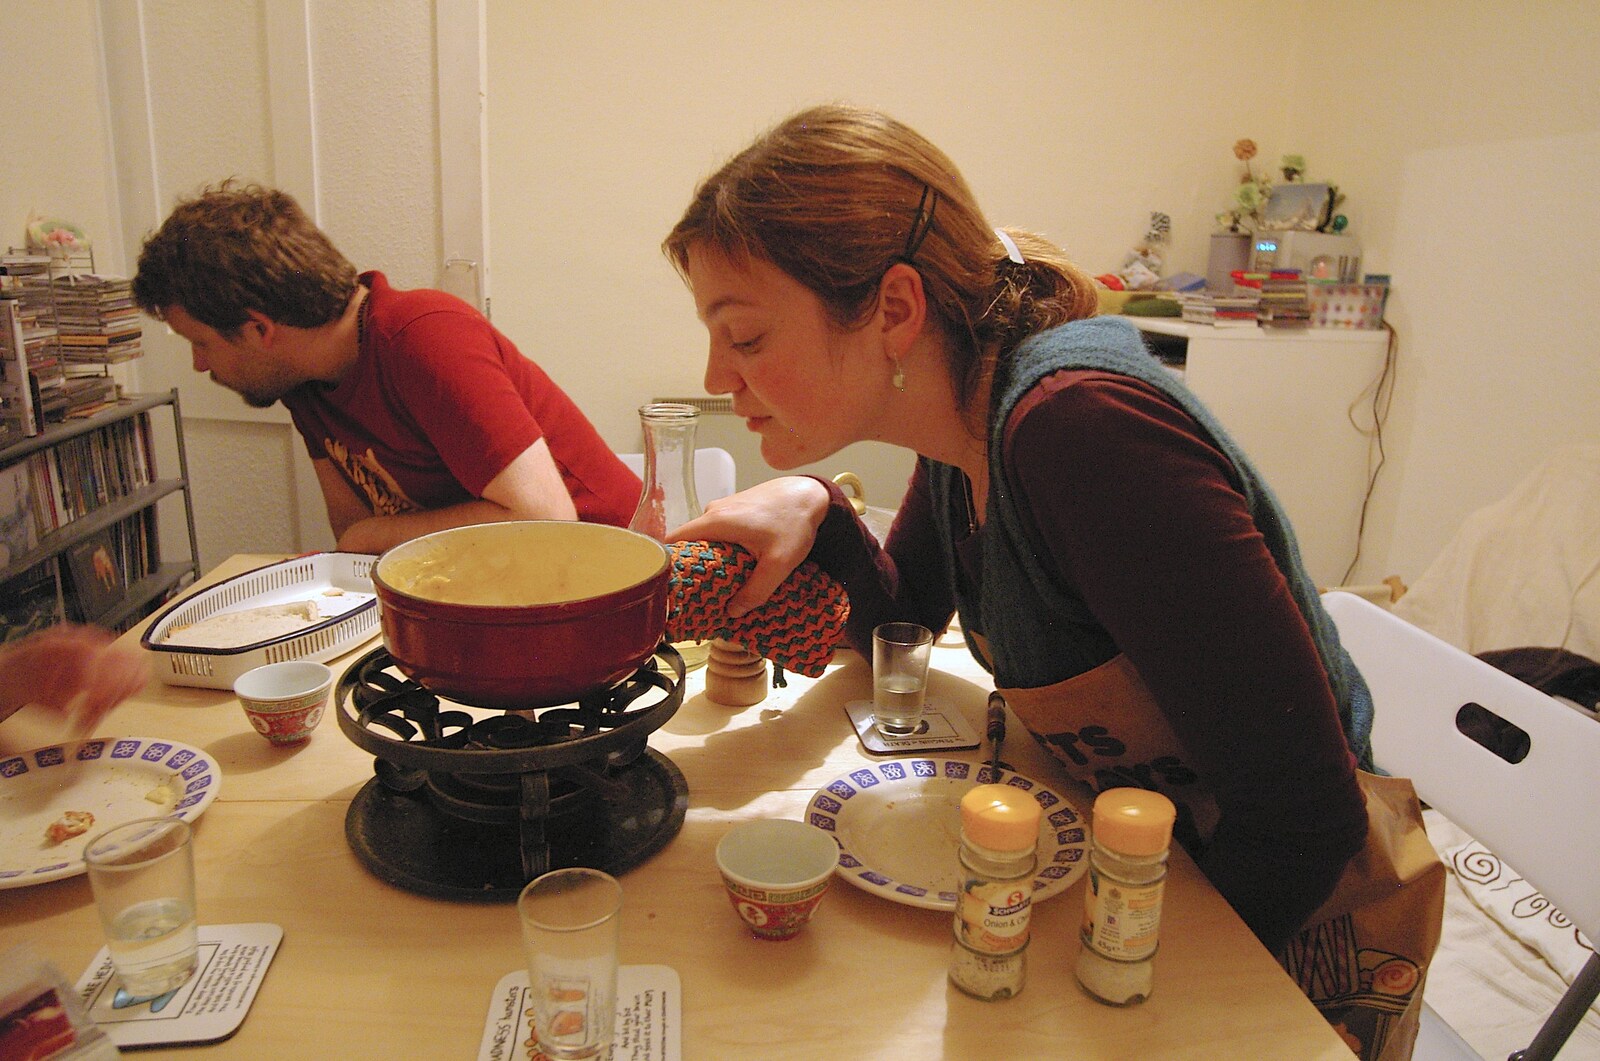 Rachel inspects the pan from Fondue, Housewarmings and The Sock (An Epilogue), Cambridge and Diss - 29th September 2006